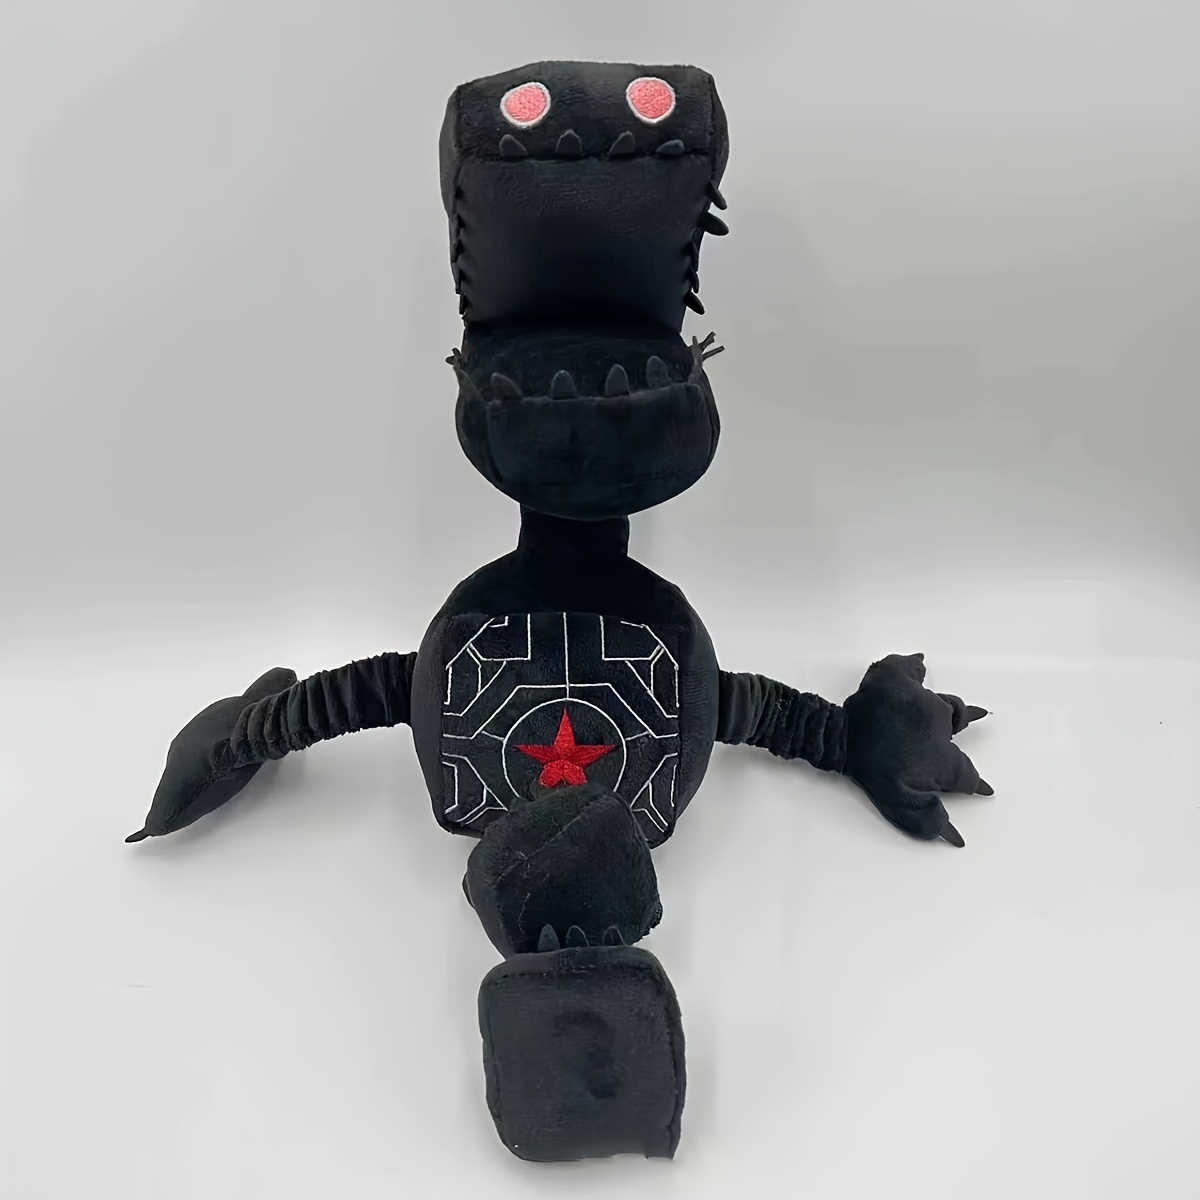  Doors Plush - 10 Halt Plushies Toy for Fans Gift, 2022 New  Monster Horror Game Stuffed Figure Doll for Kids and Adults, Halloween  Christmas Birthday Choice for Boys Girls : Toys